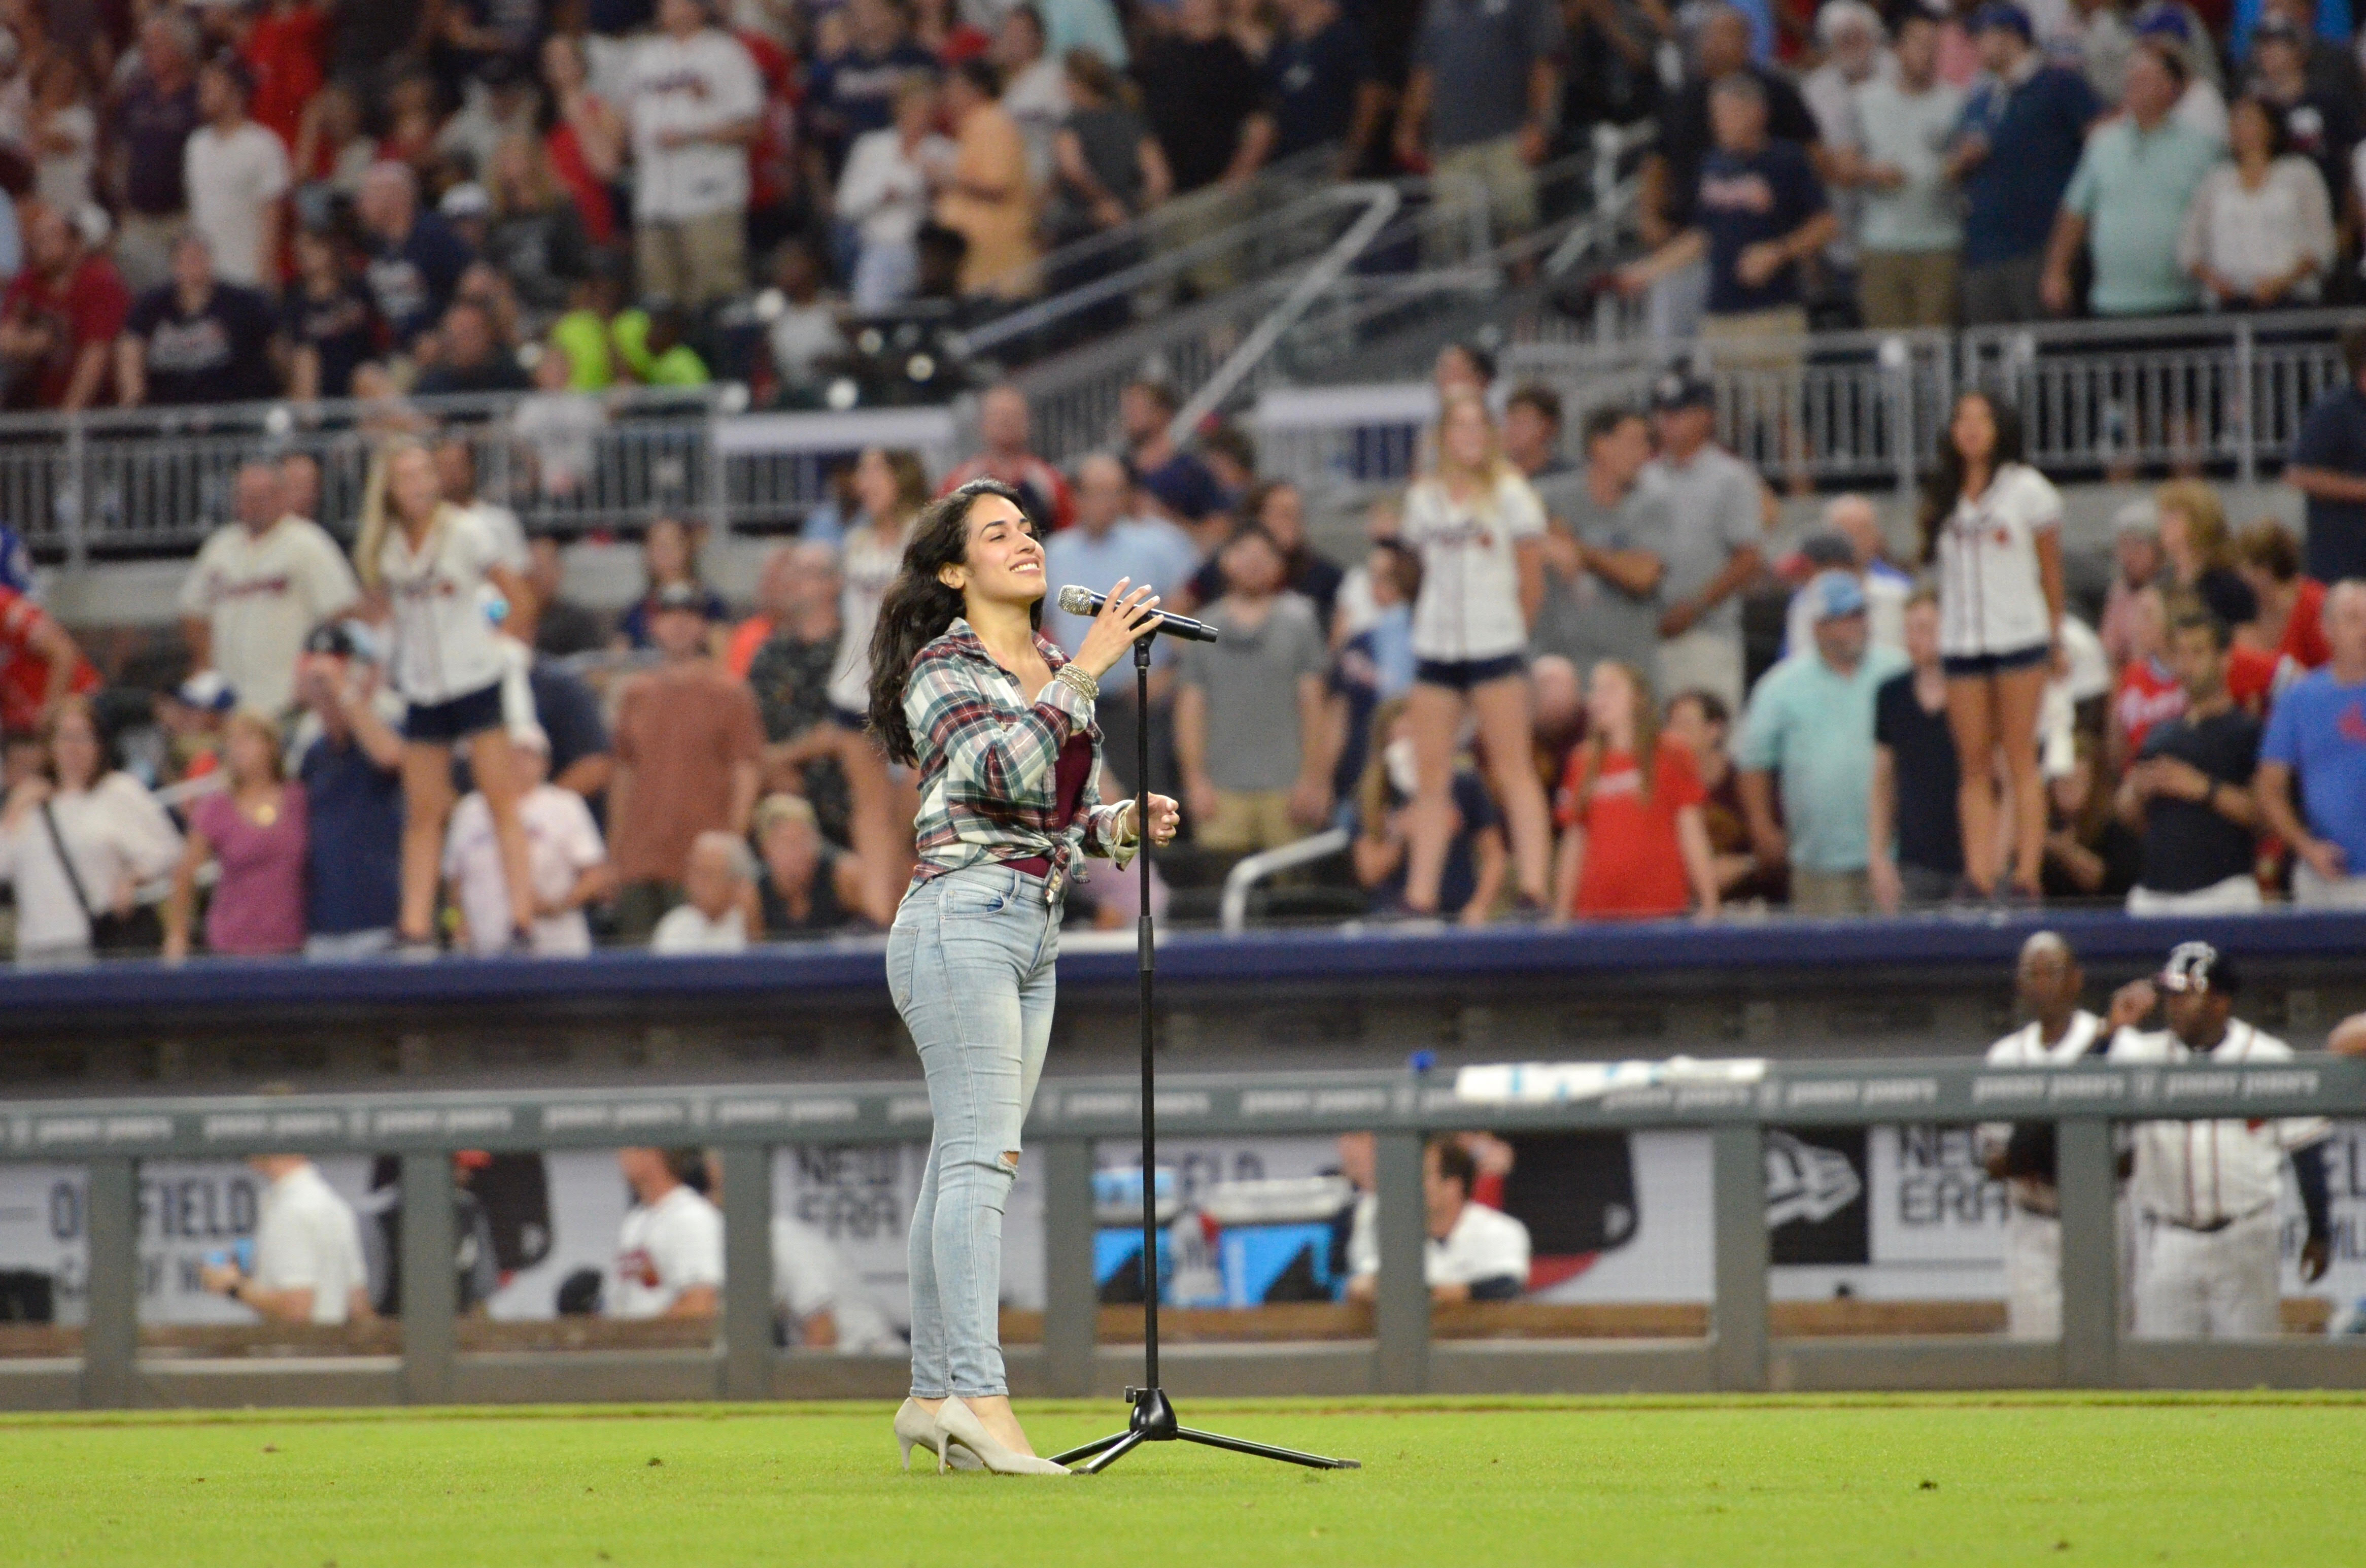 Musician uses Braves game to launch her performance career